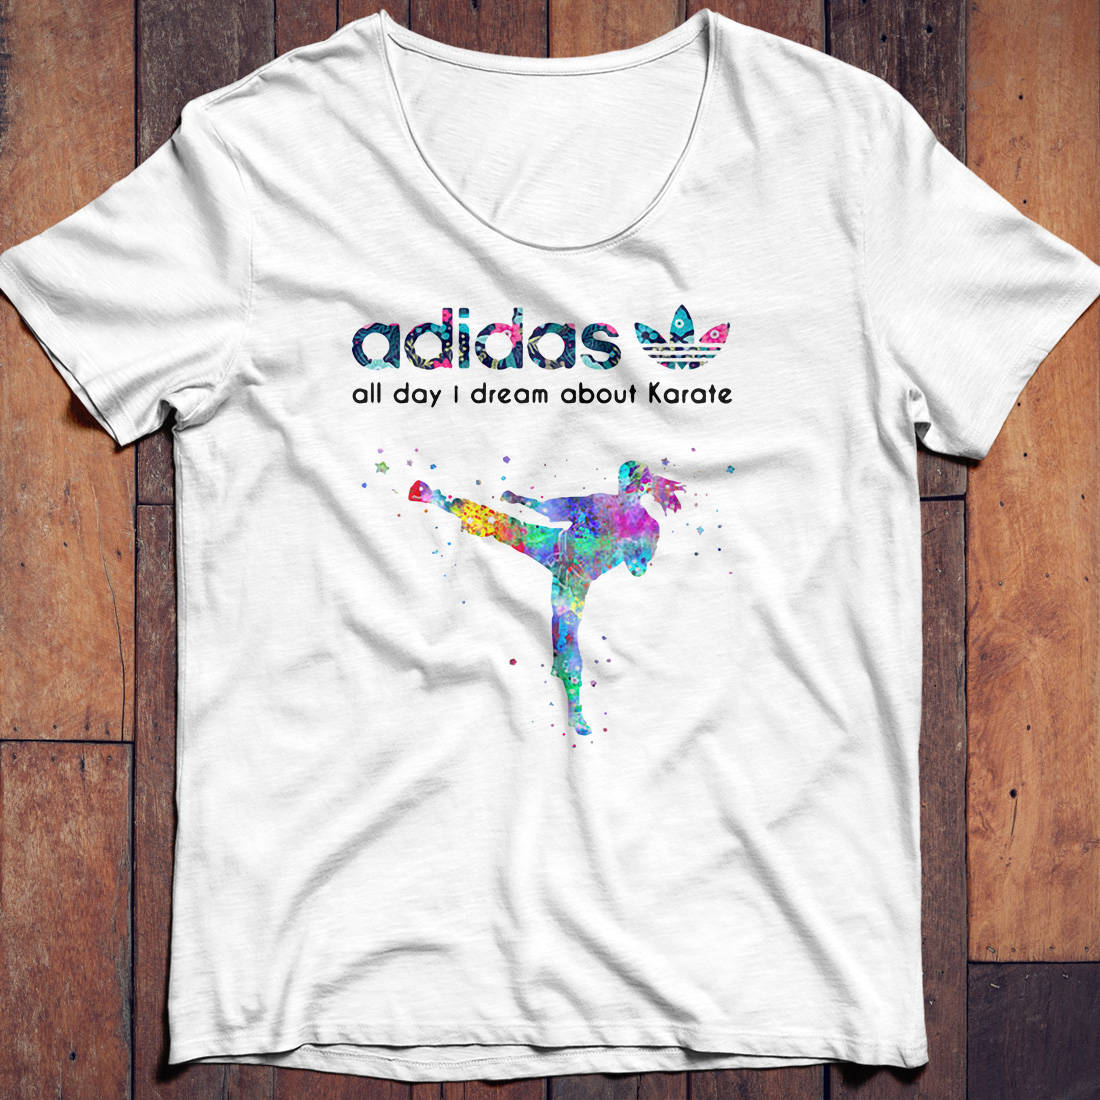 Adidas day I dream about Karate shirt,